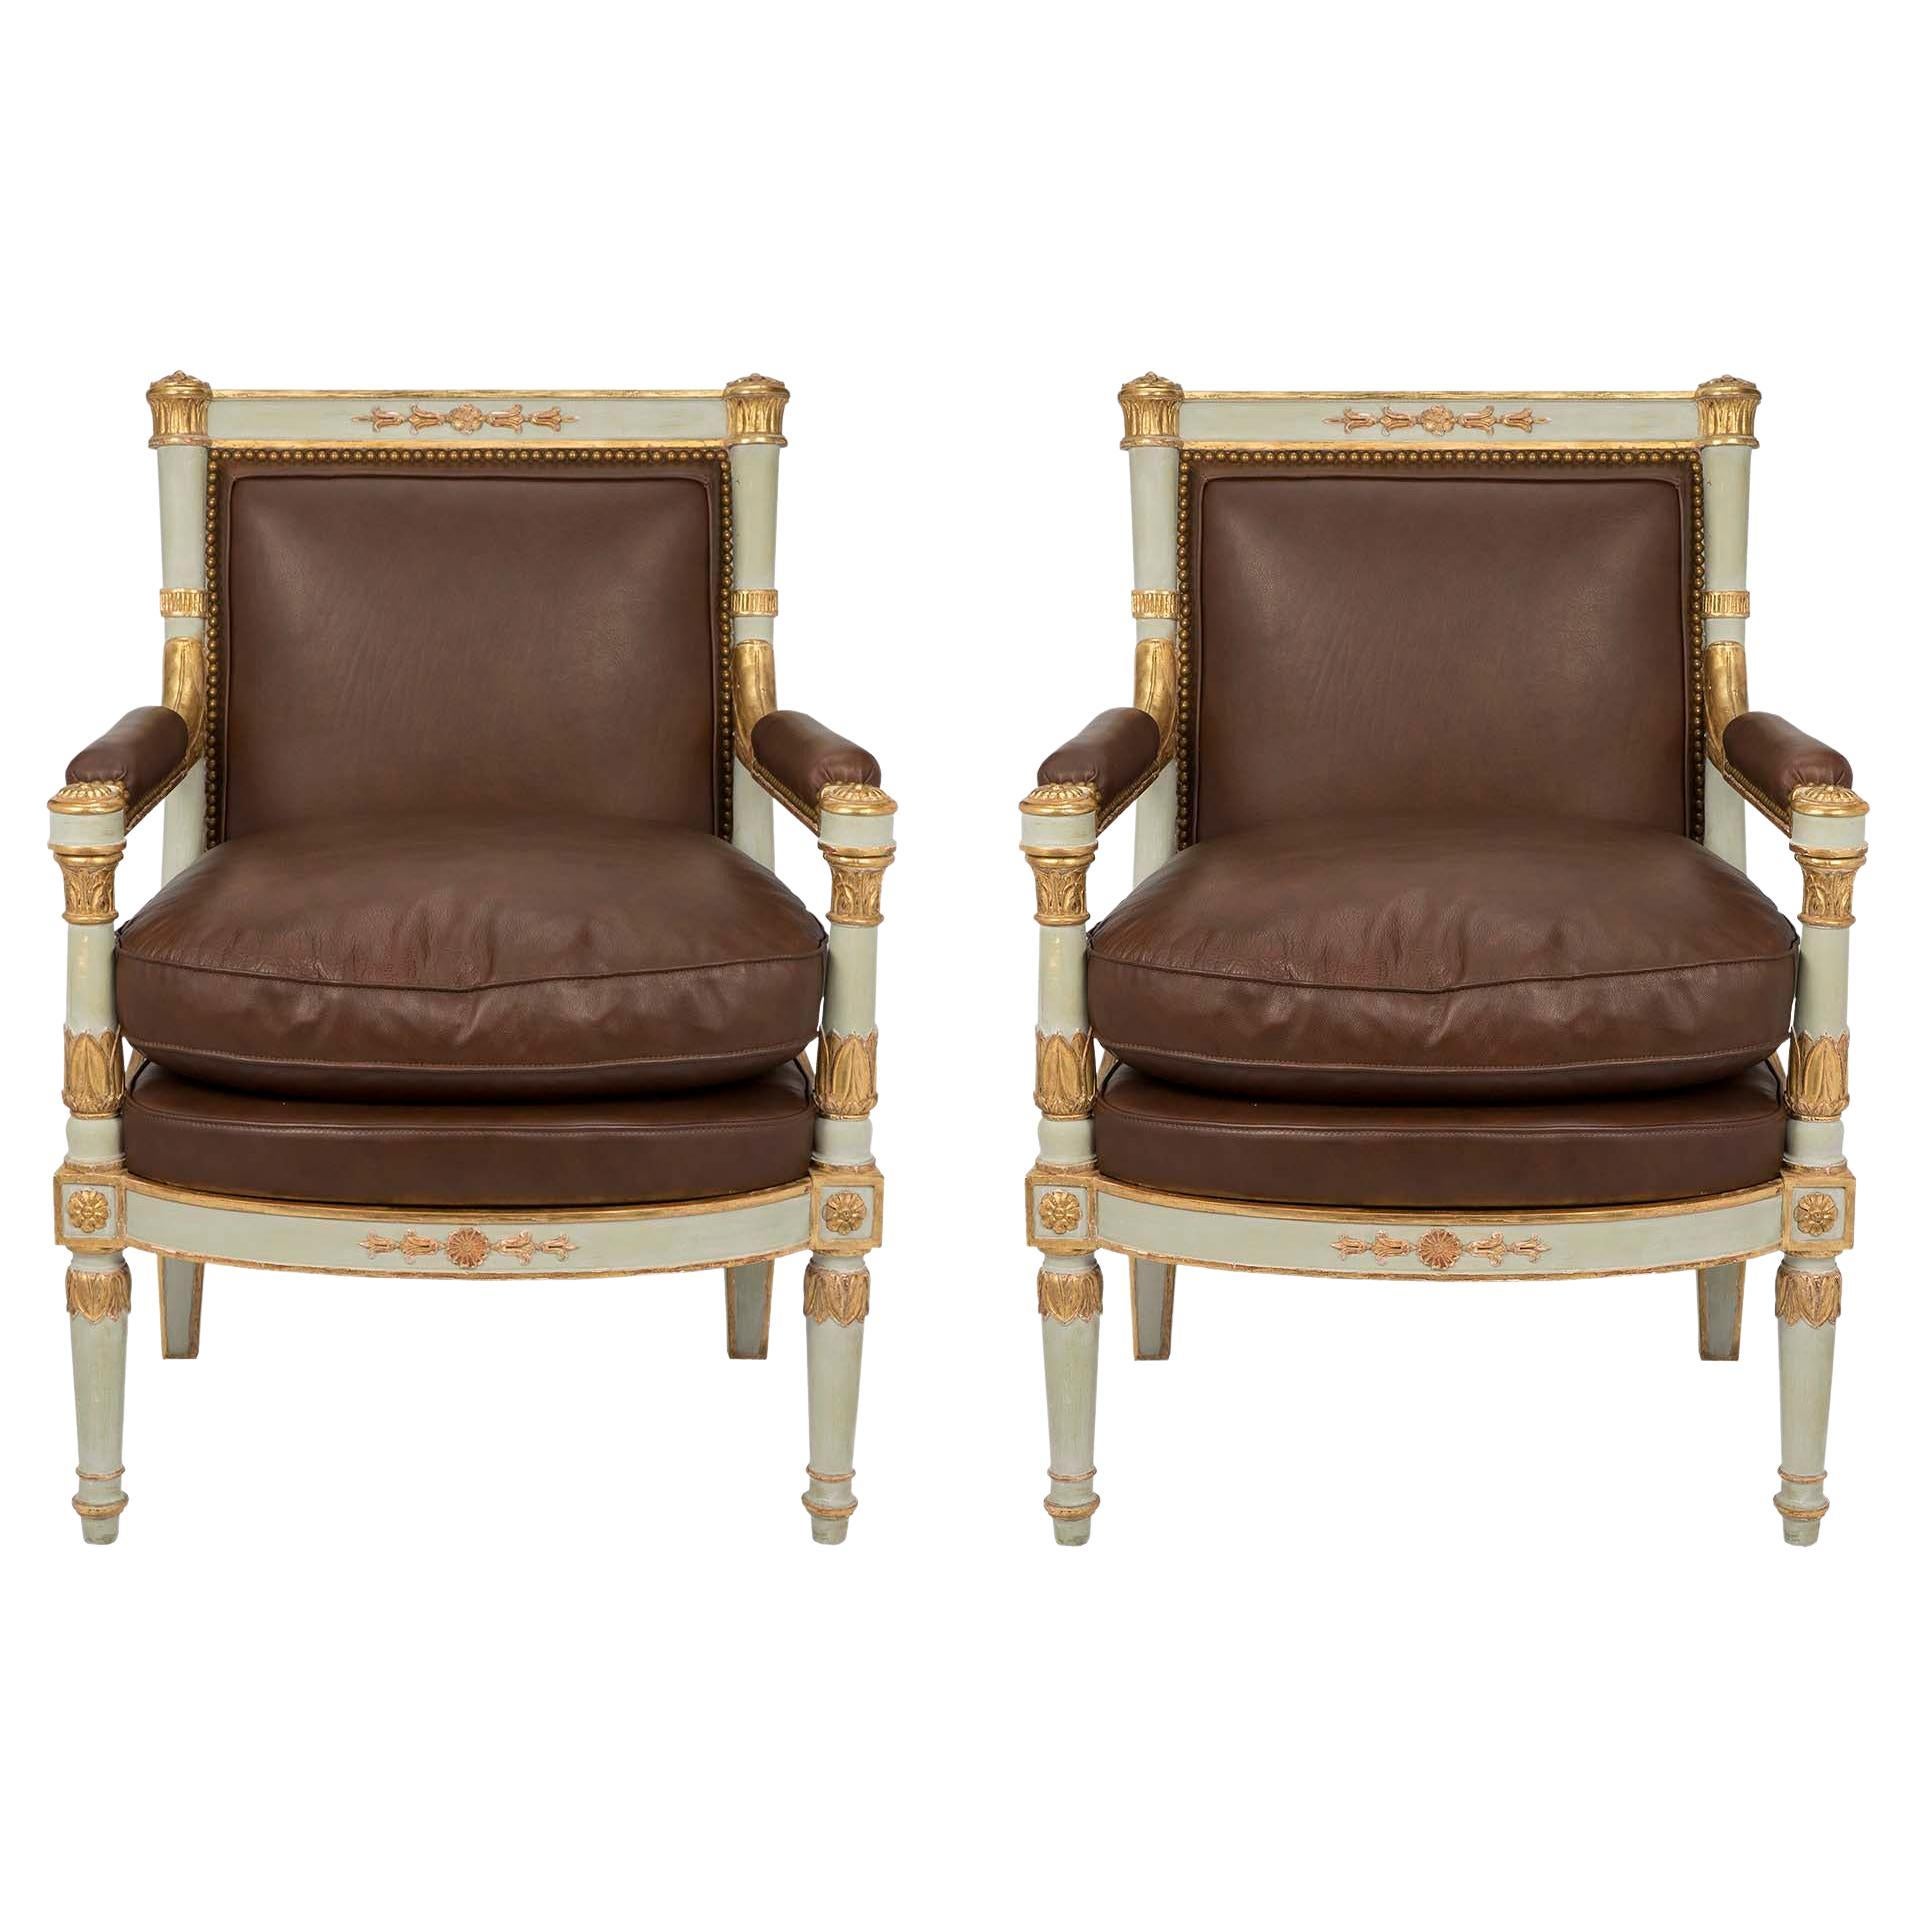 Pair of Italian Early 19th Century Neoclassical Style Armchairs For Sale